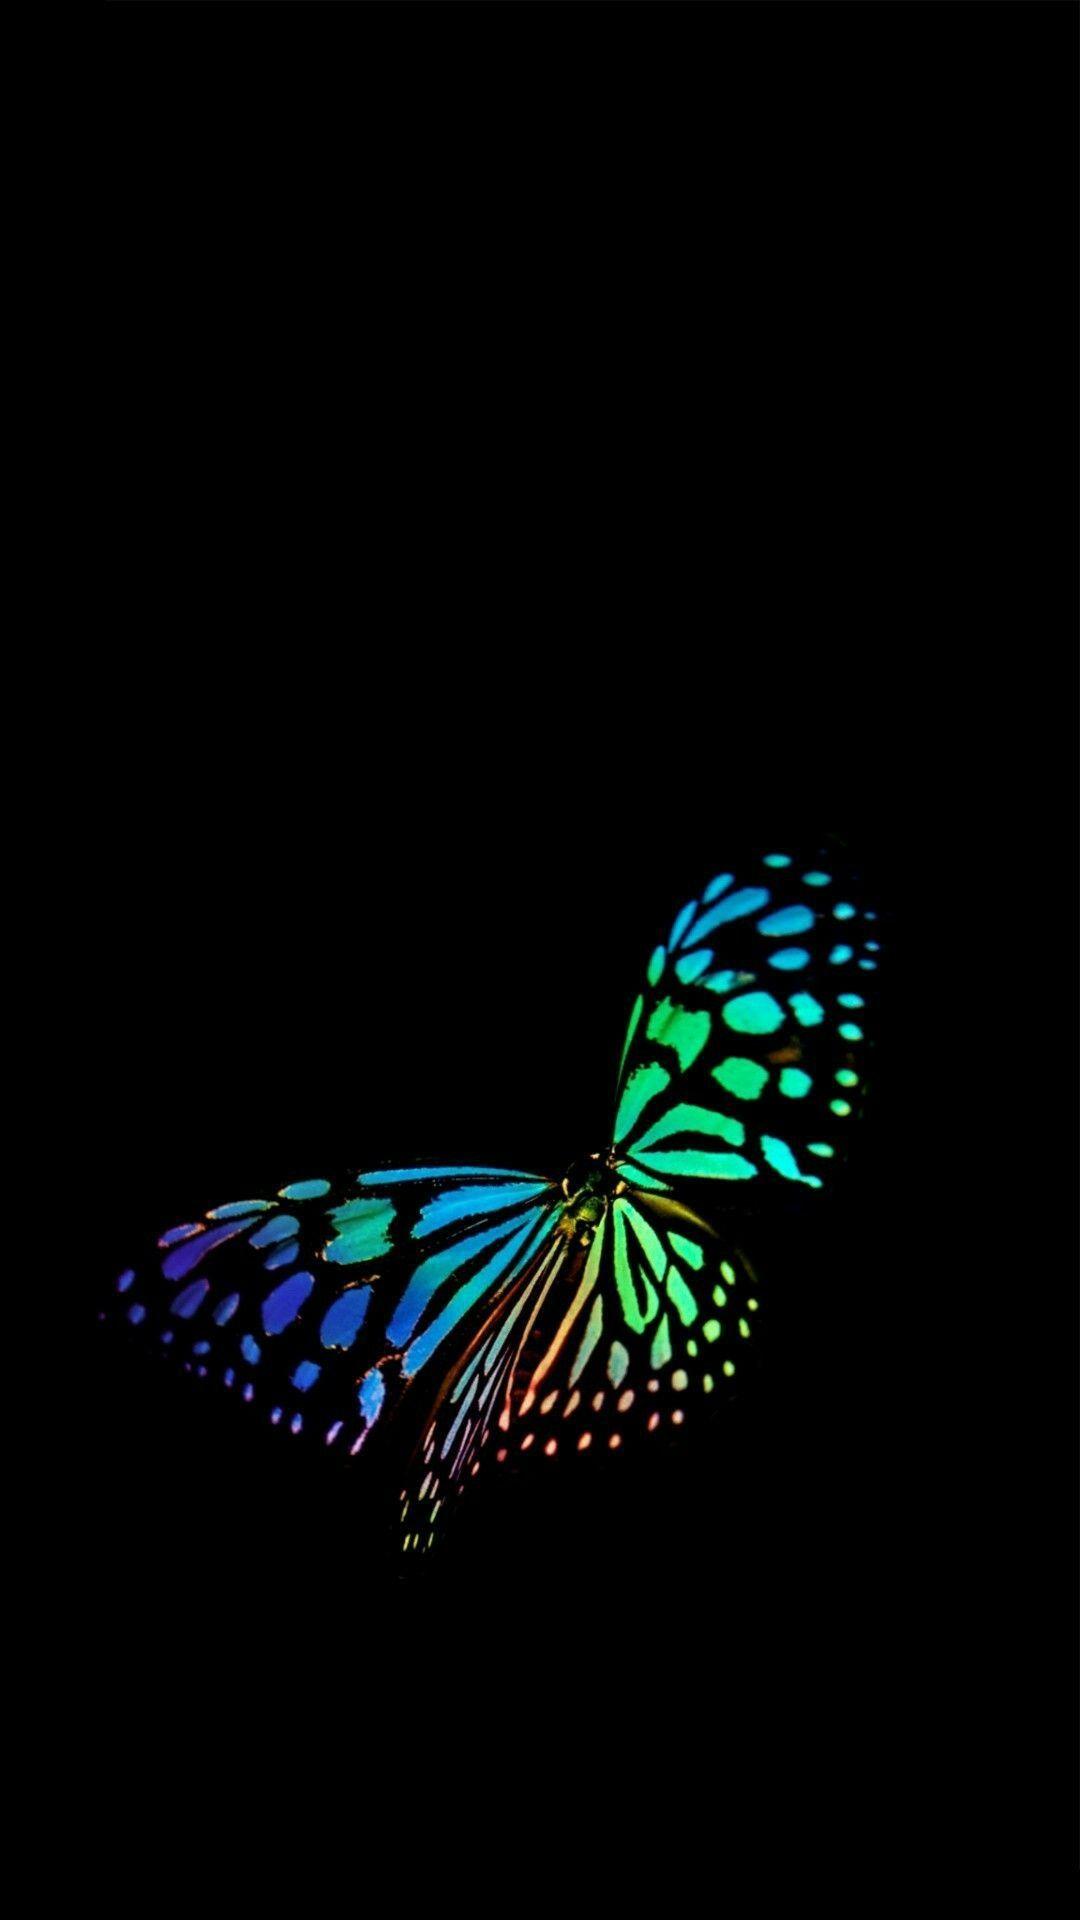 Butterfly Black Wallpapers - Top Free Butterfly Black Backgrounds ...